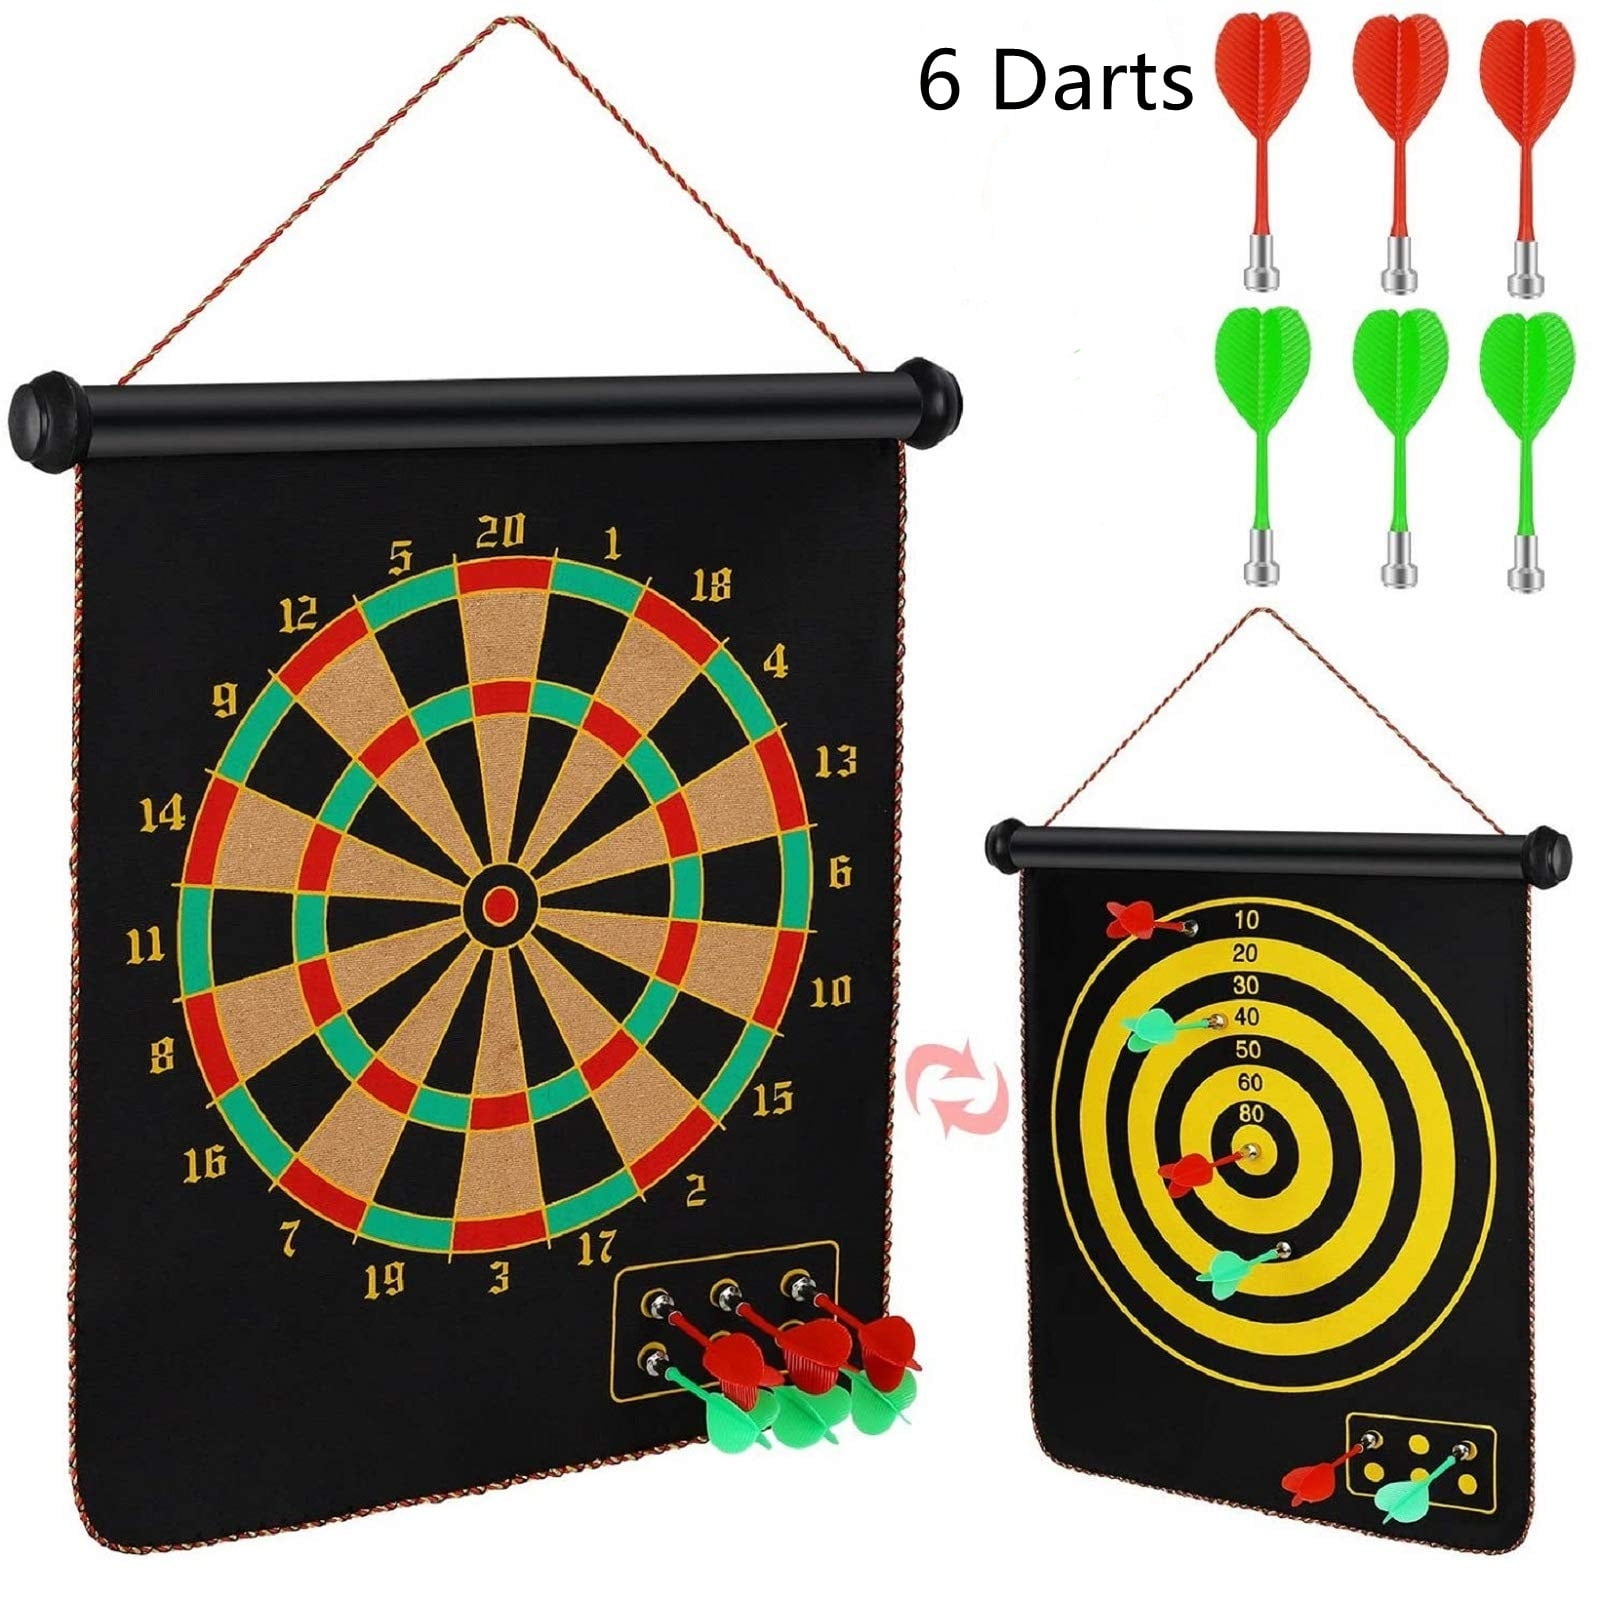 MAGNETIC ROLL UP DART BOARD DOUBLE SIDED HANGING 2 IN 1 GAME 6 SAFETY DARTS 